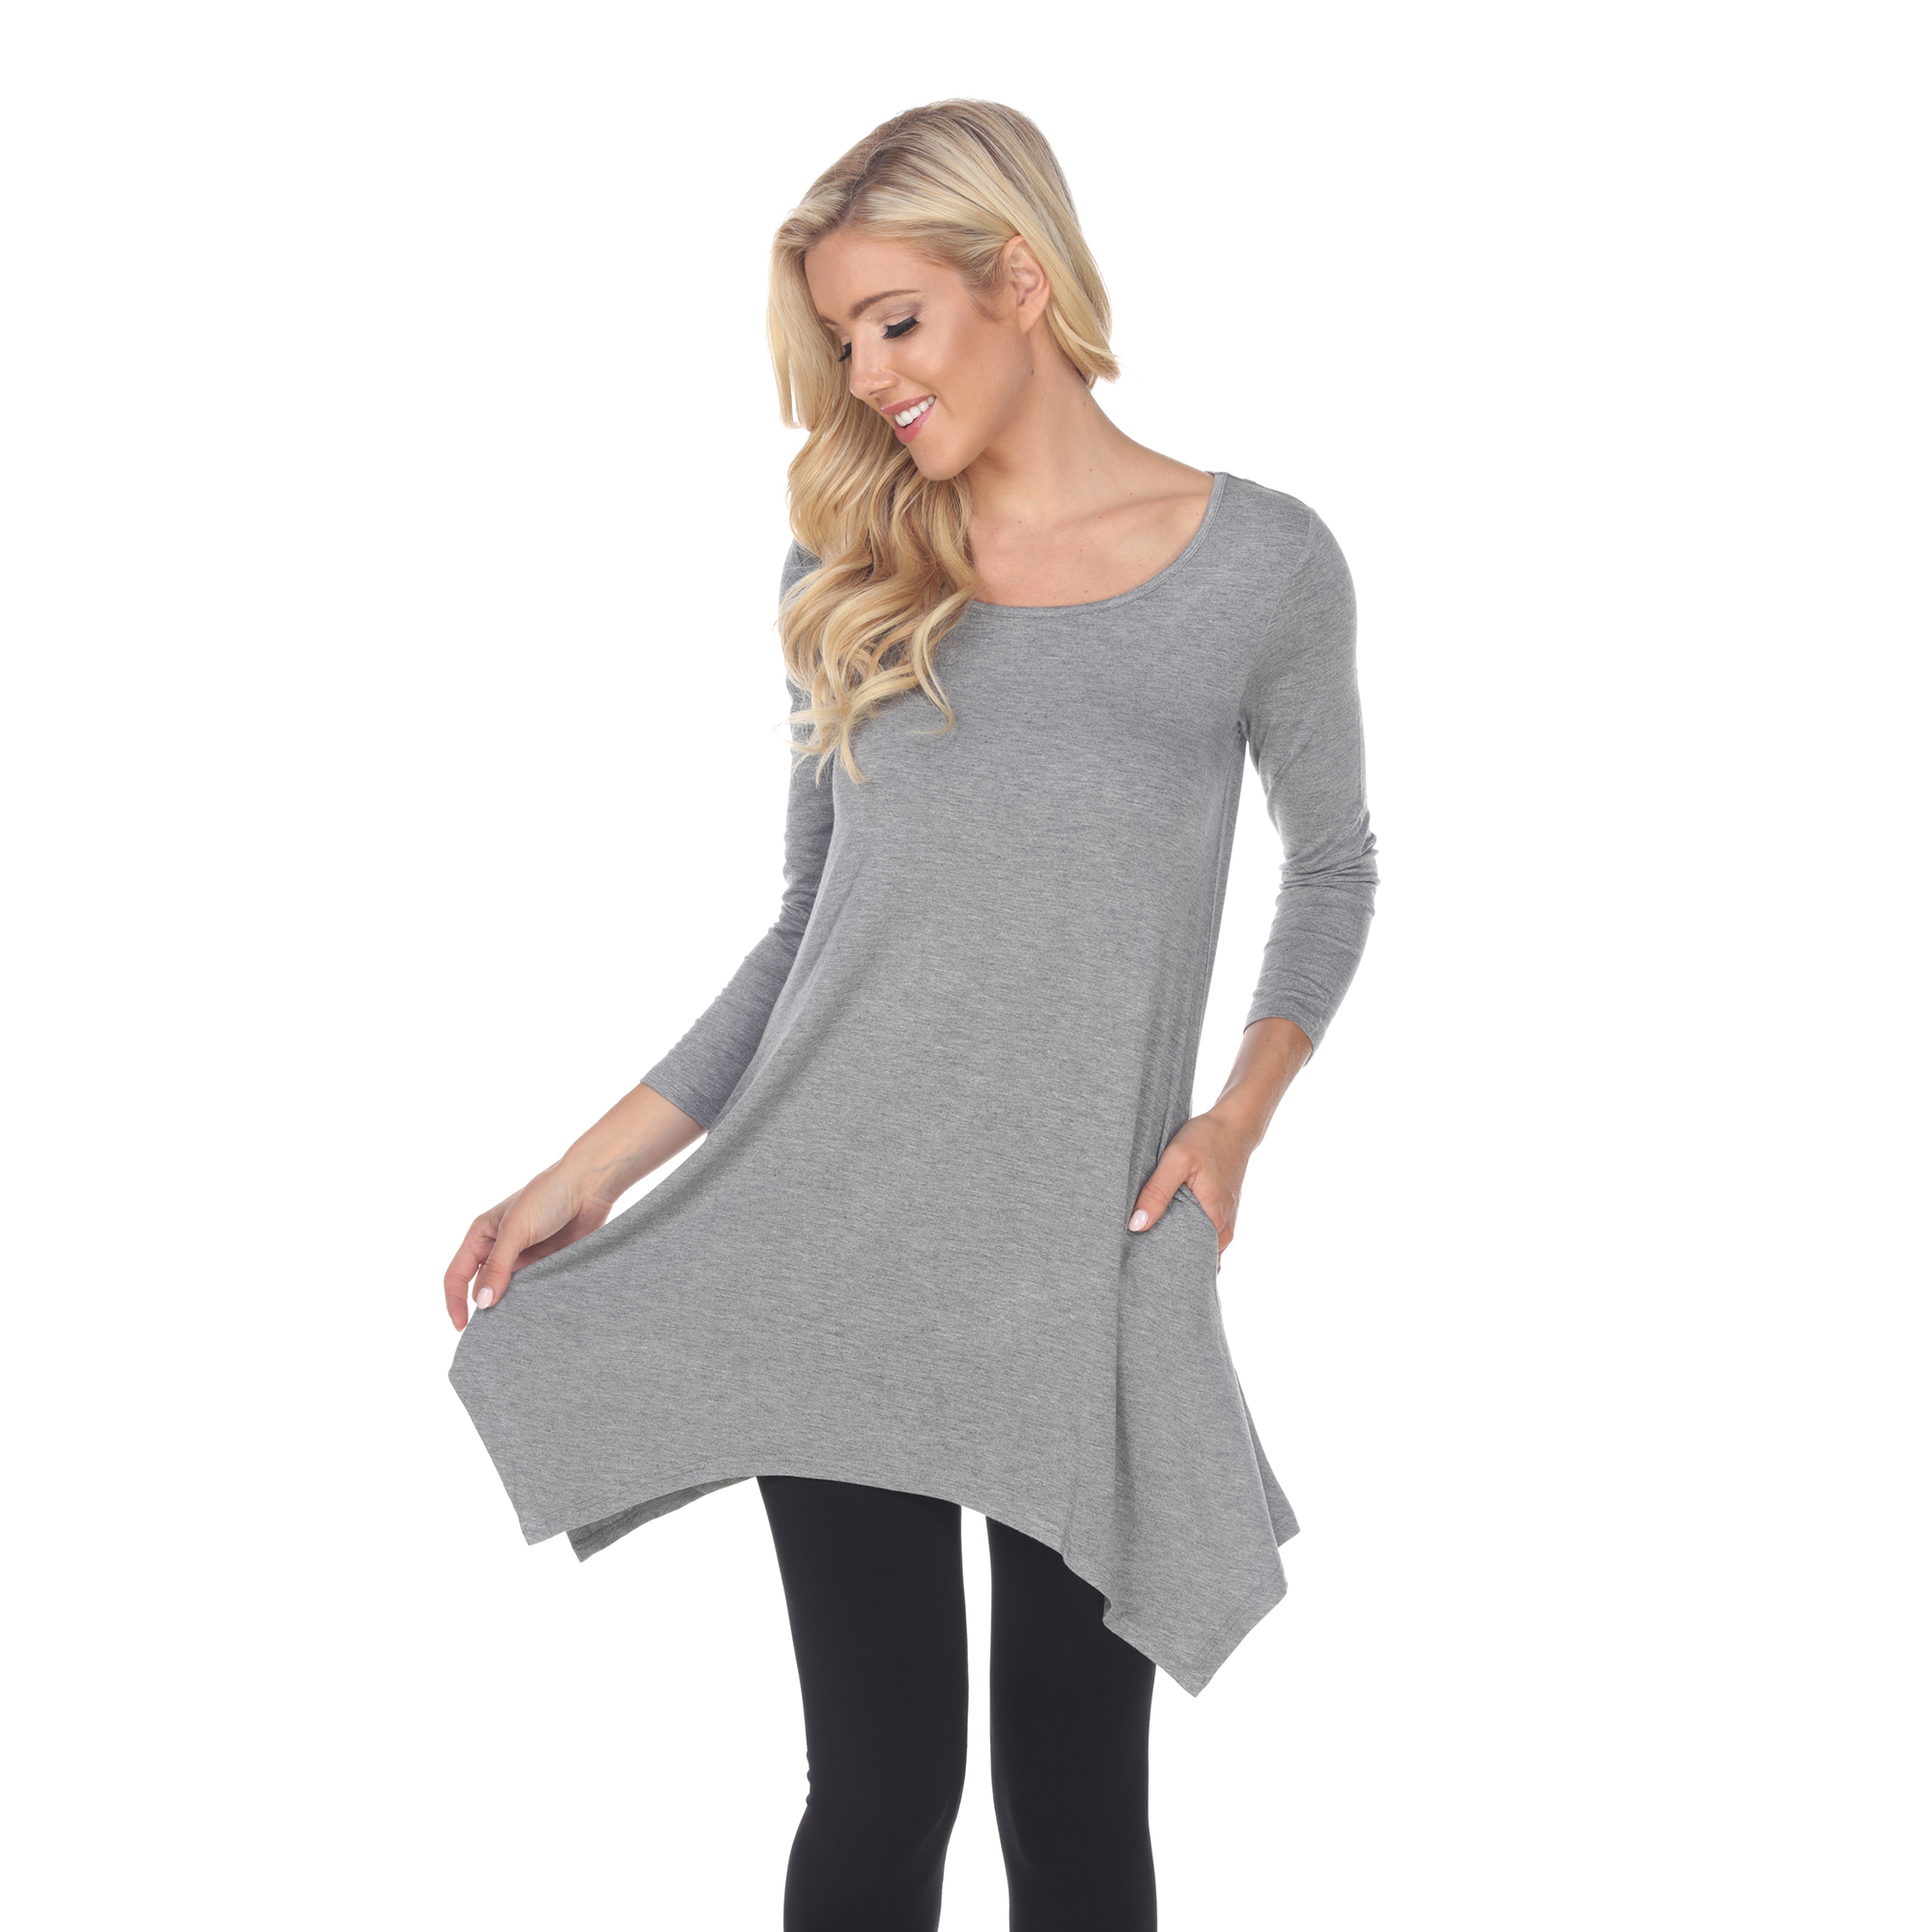 White Mark Women's Quarter Sleeve Tunic Top With Pockets - Charcoal, Large